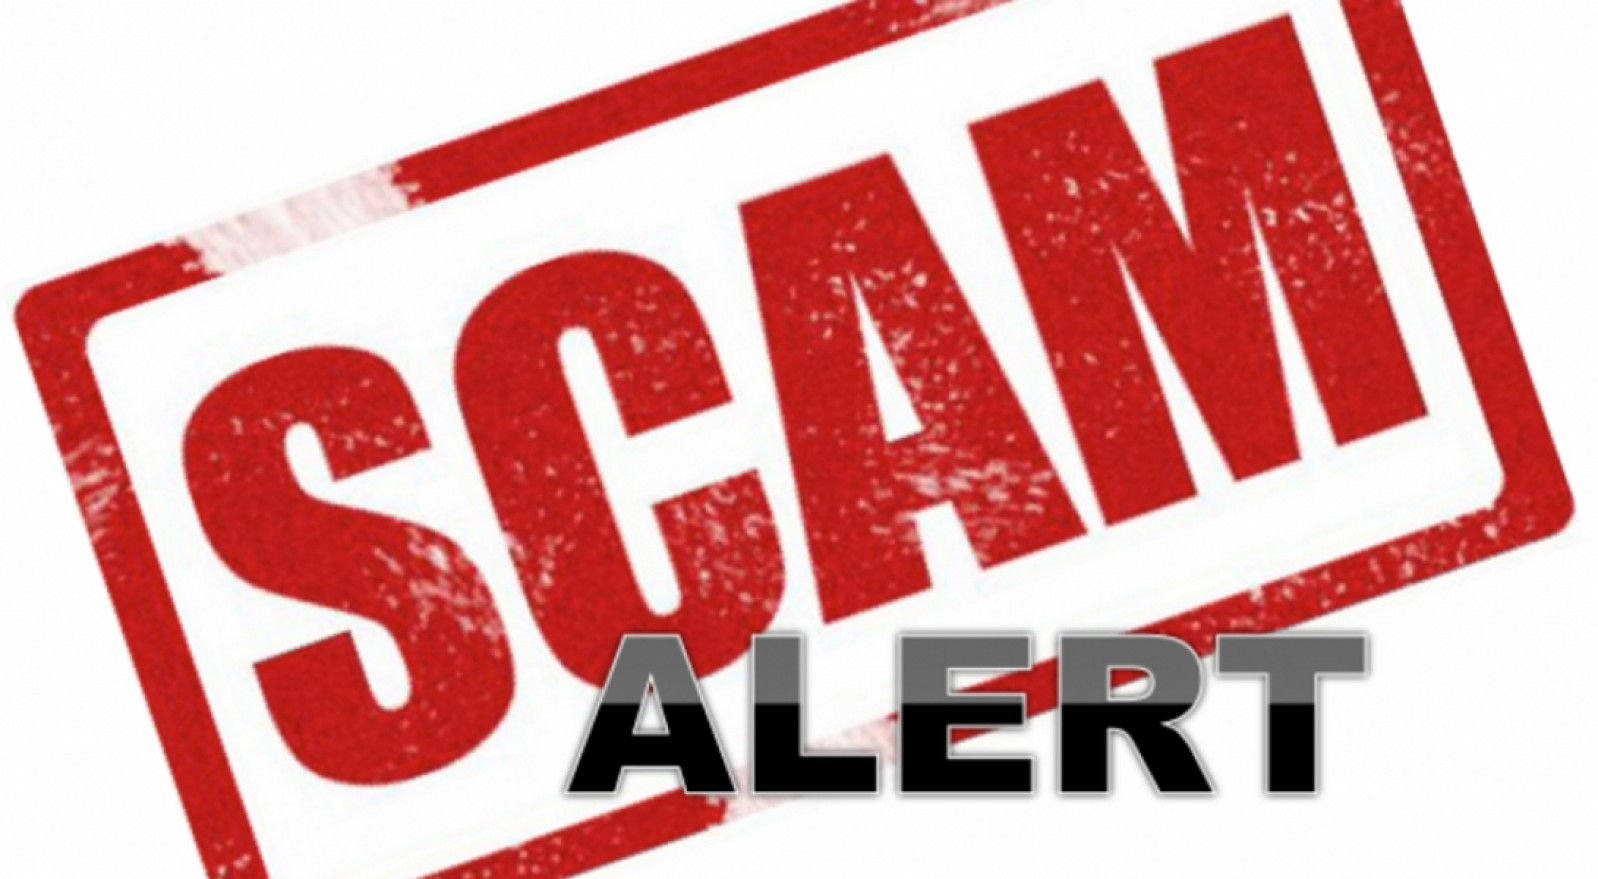 SCAM ALERT - Beware of scam emails claiming to sell MIM data